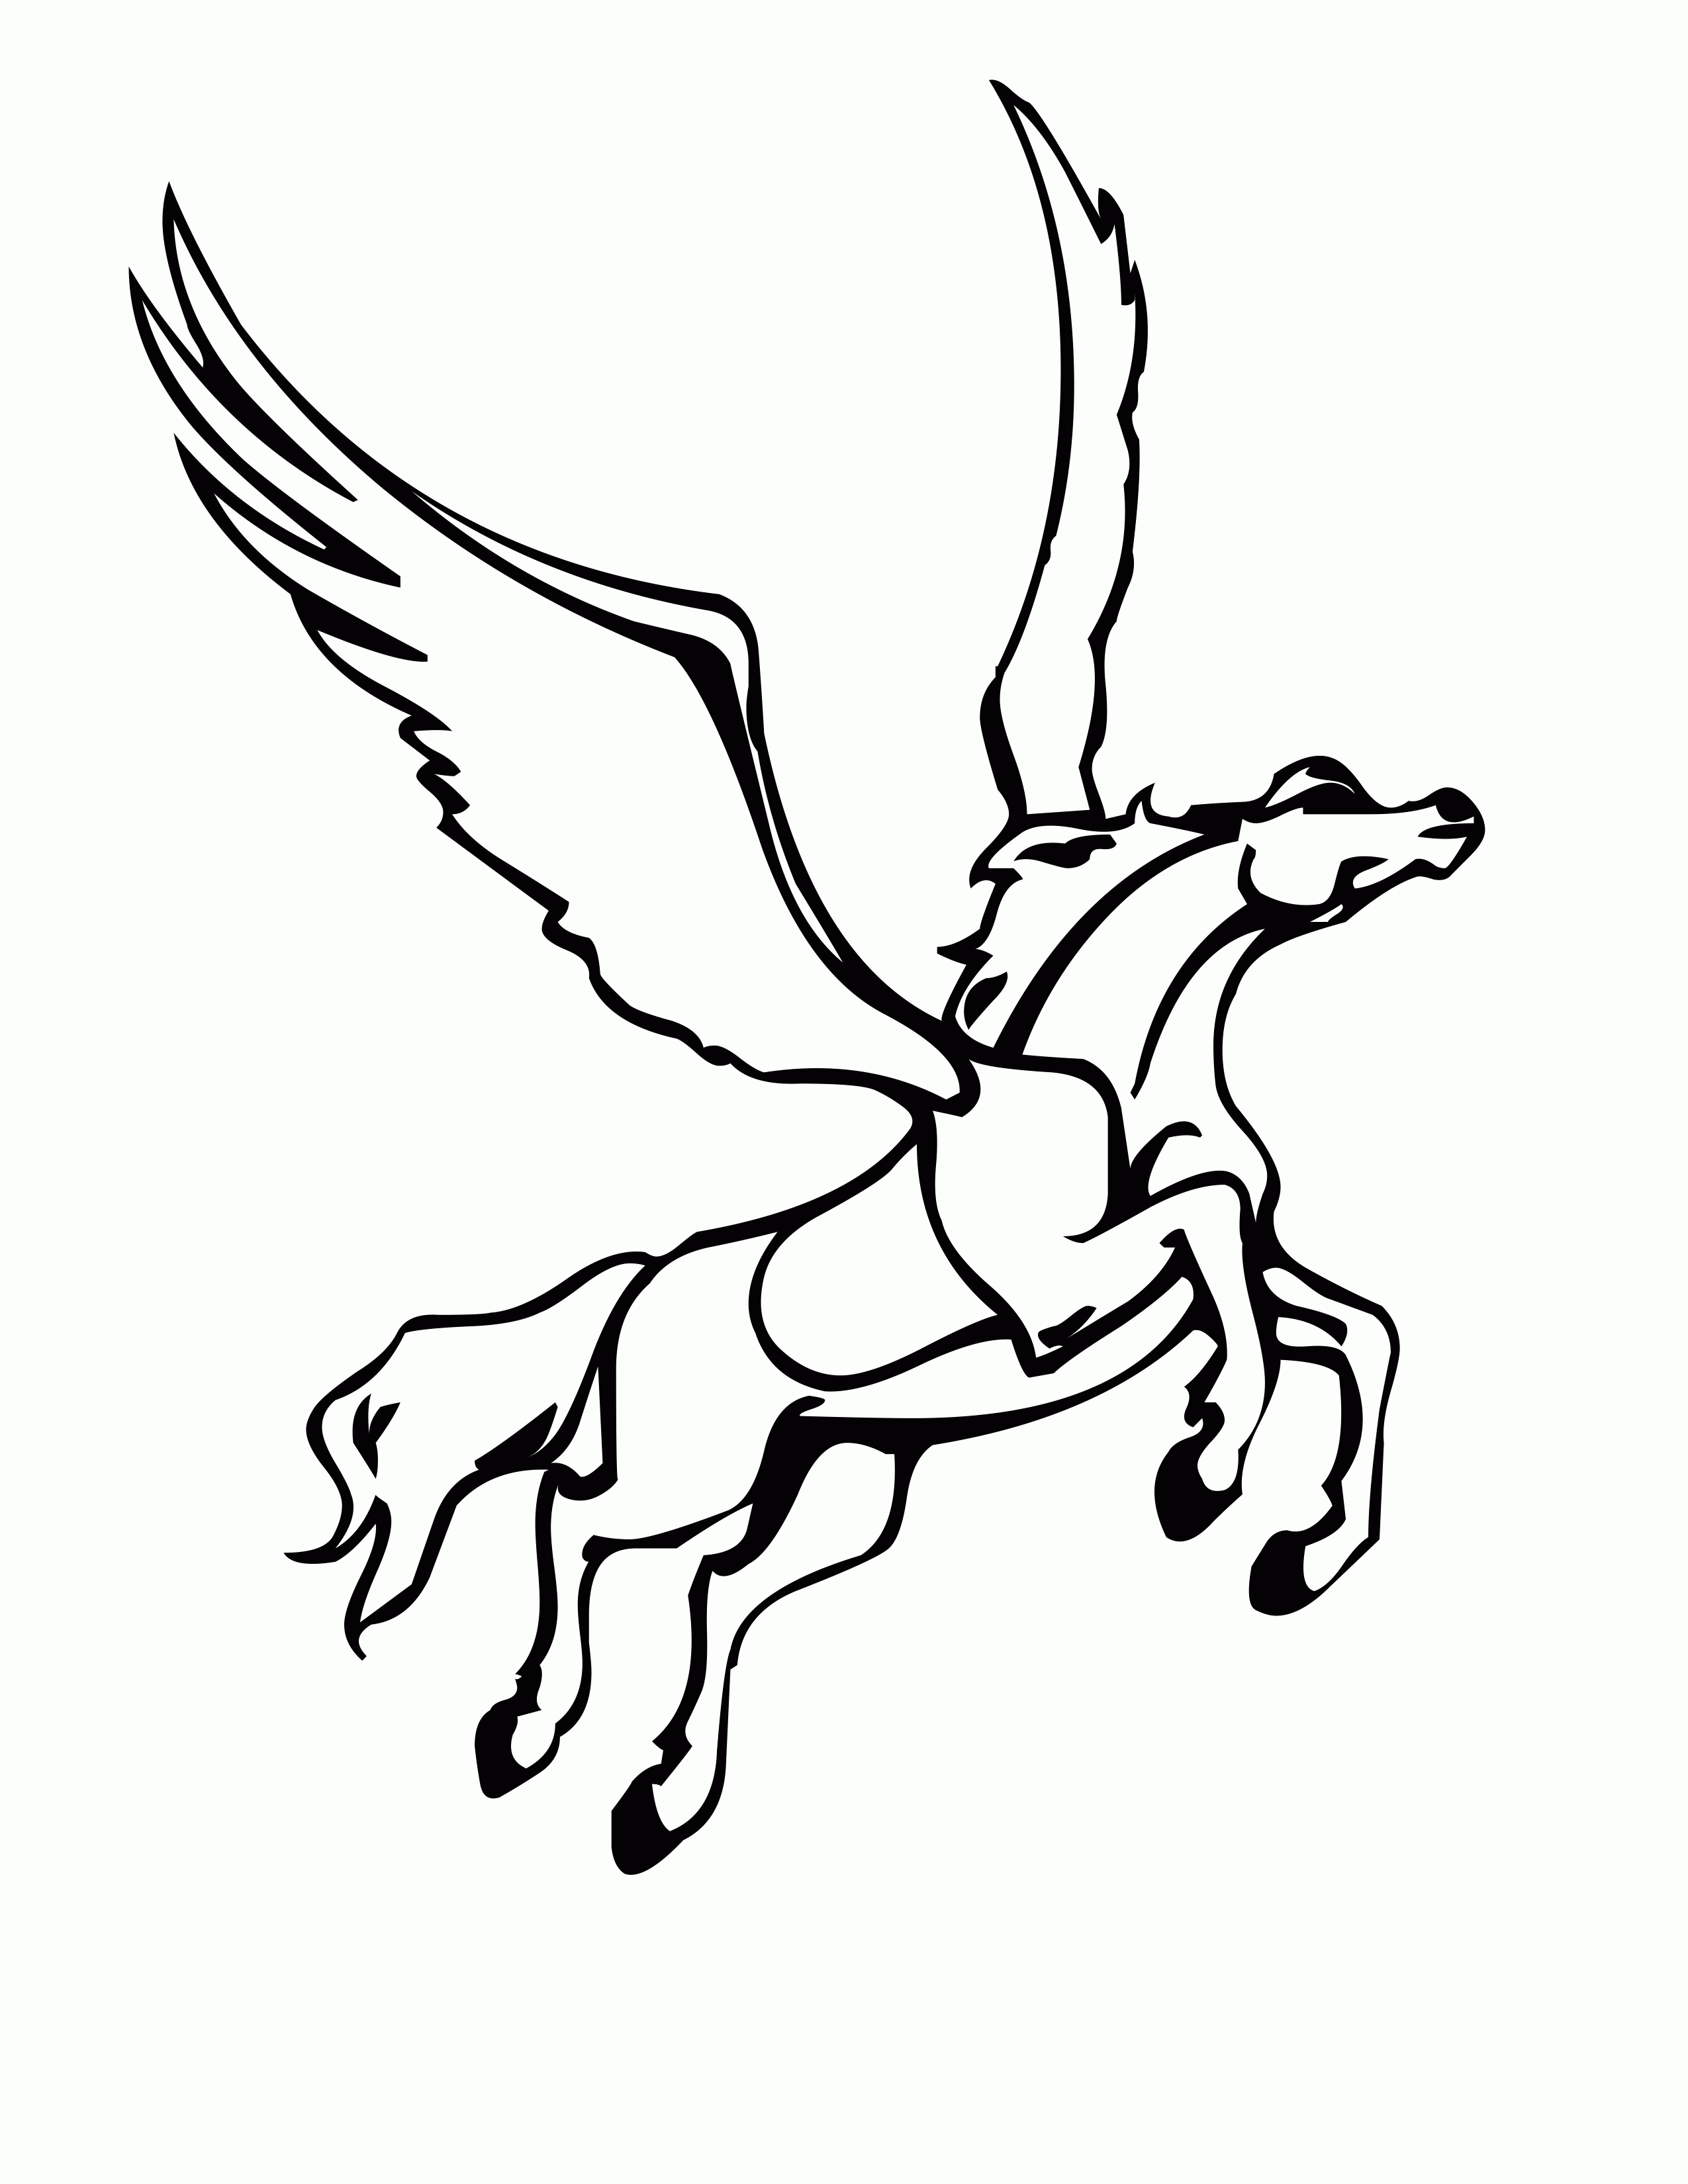 11 Pics of Pegasus Mythical Creature Coloring Pages - Mythical ...